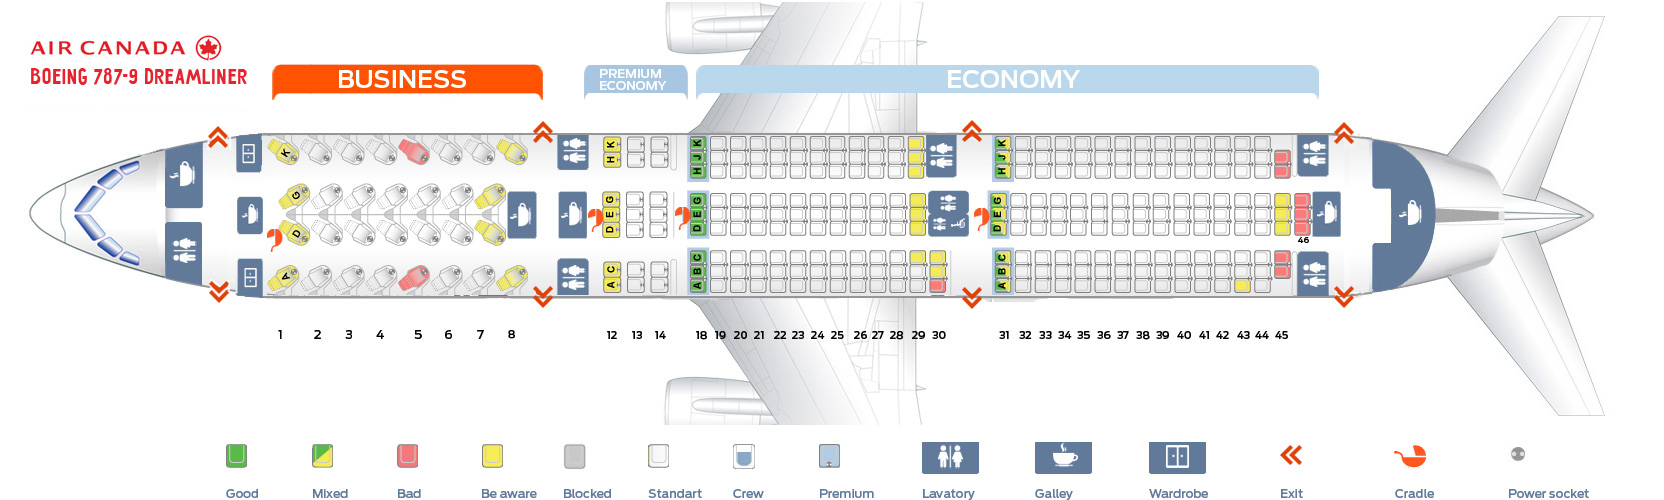 Seat Map and Seating Chart Boeing 787 9 Dreamliner Air Canada